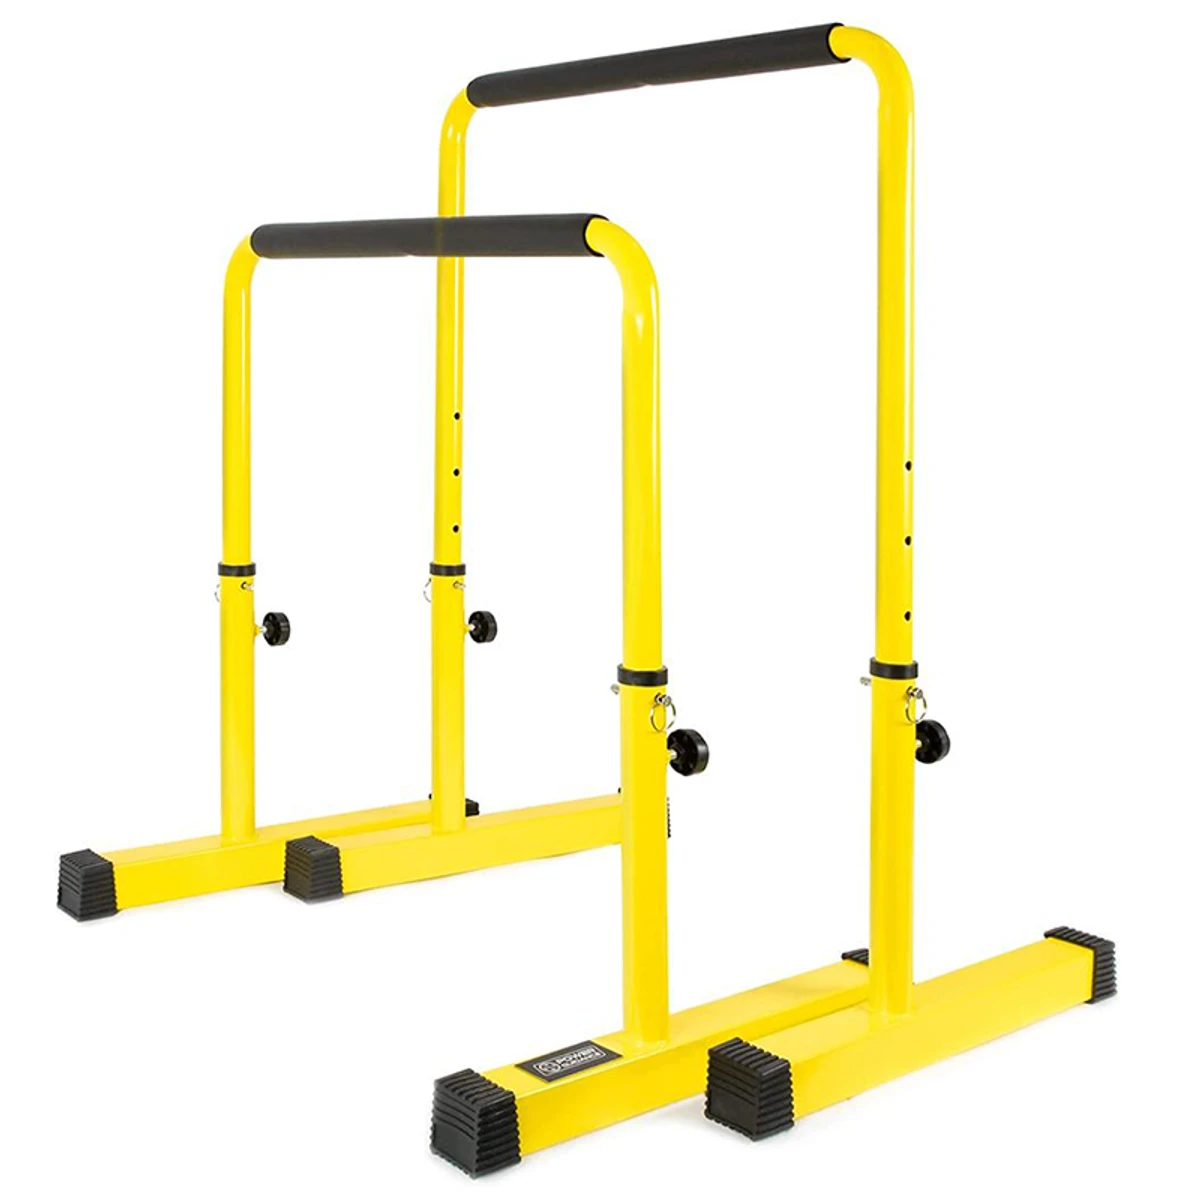 High Push Ups Stand & Dips Station - 48inched